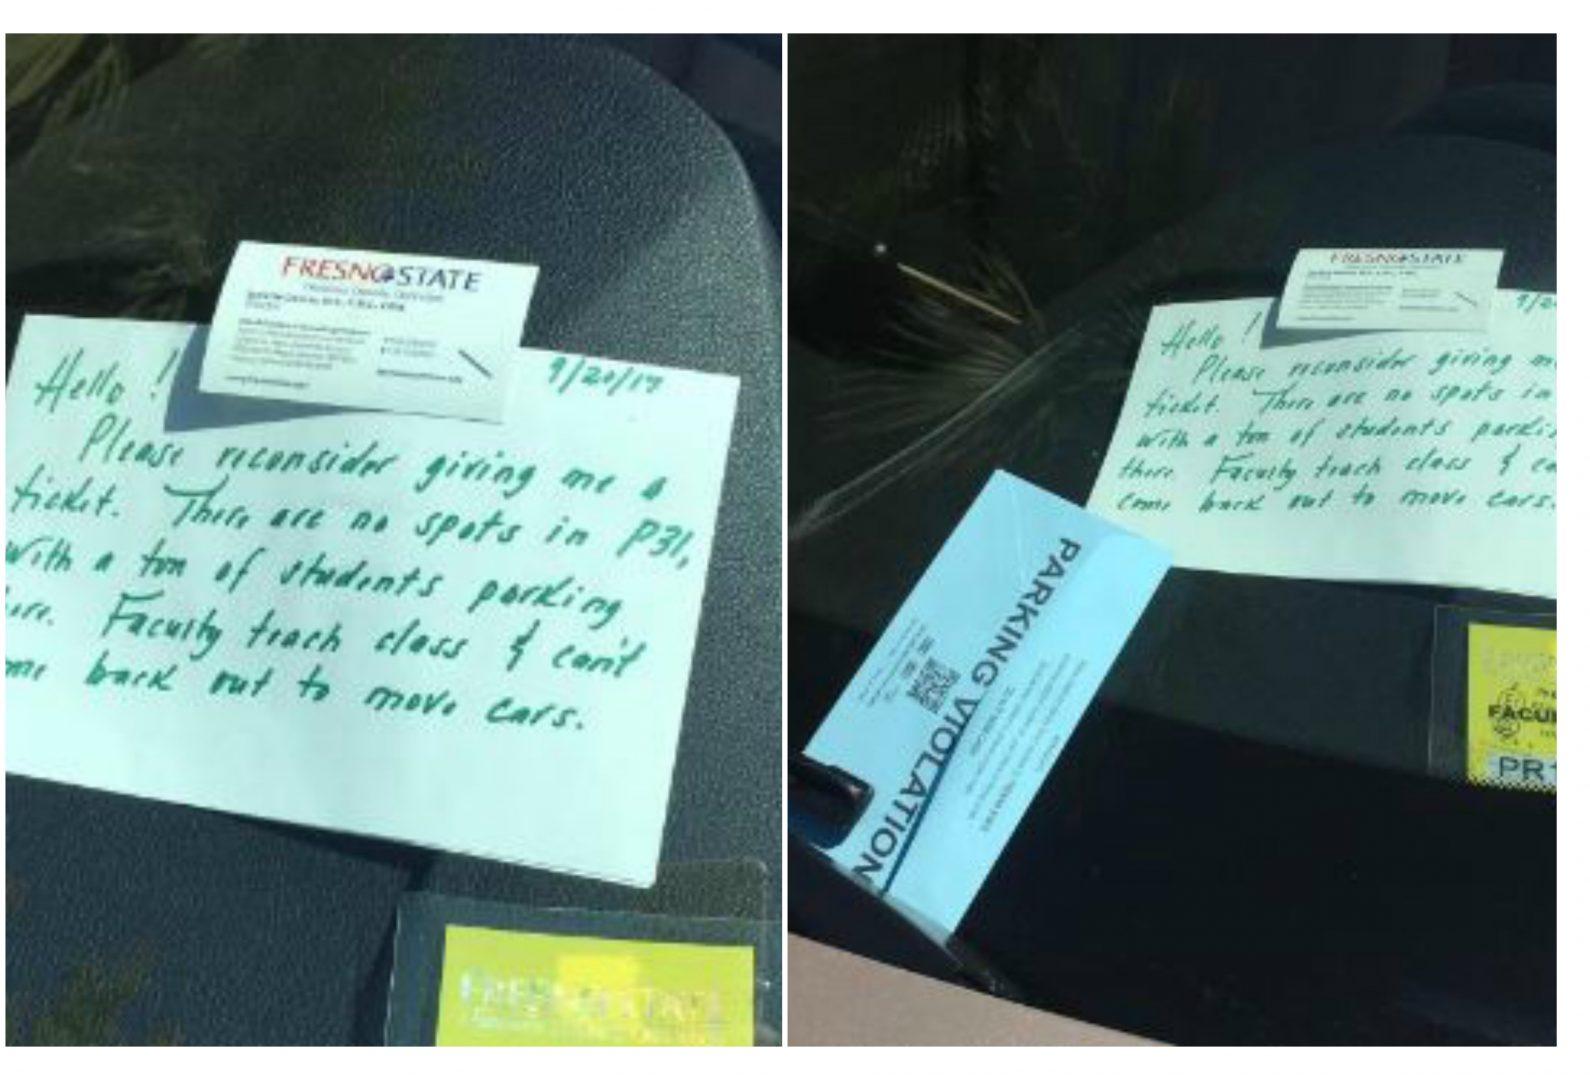 A+note+left+by+a+Fresno+State+employee+asking+parking+police+not+to+ticket+her+if+she+went+over+the+30-minute+parking+limit.+Parking+enforcers+ignored+the+request.